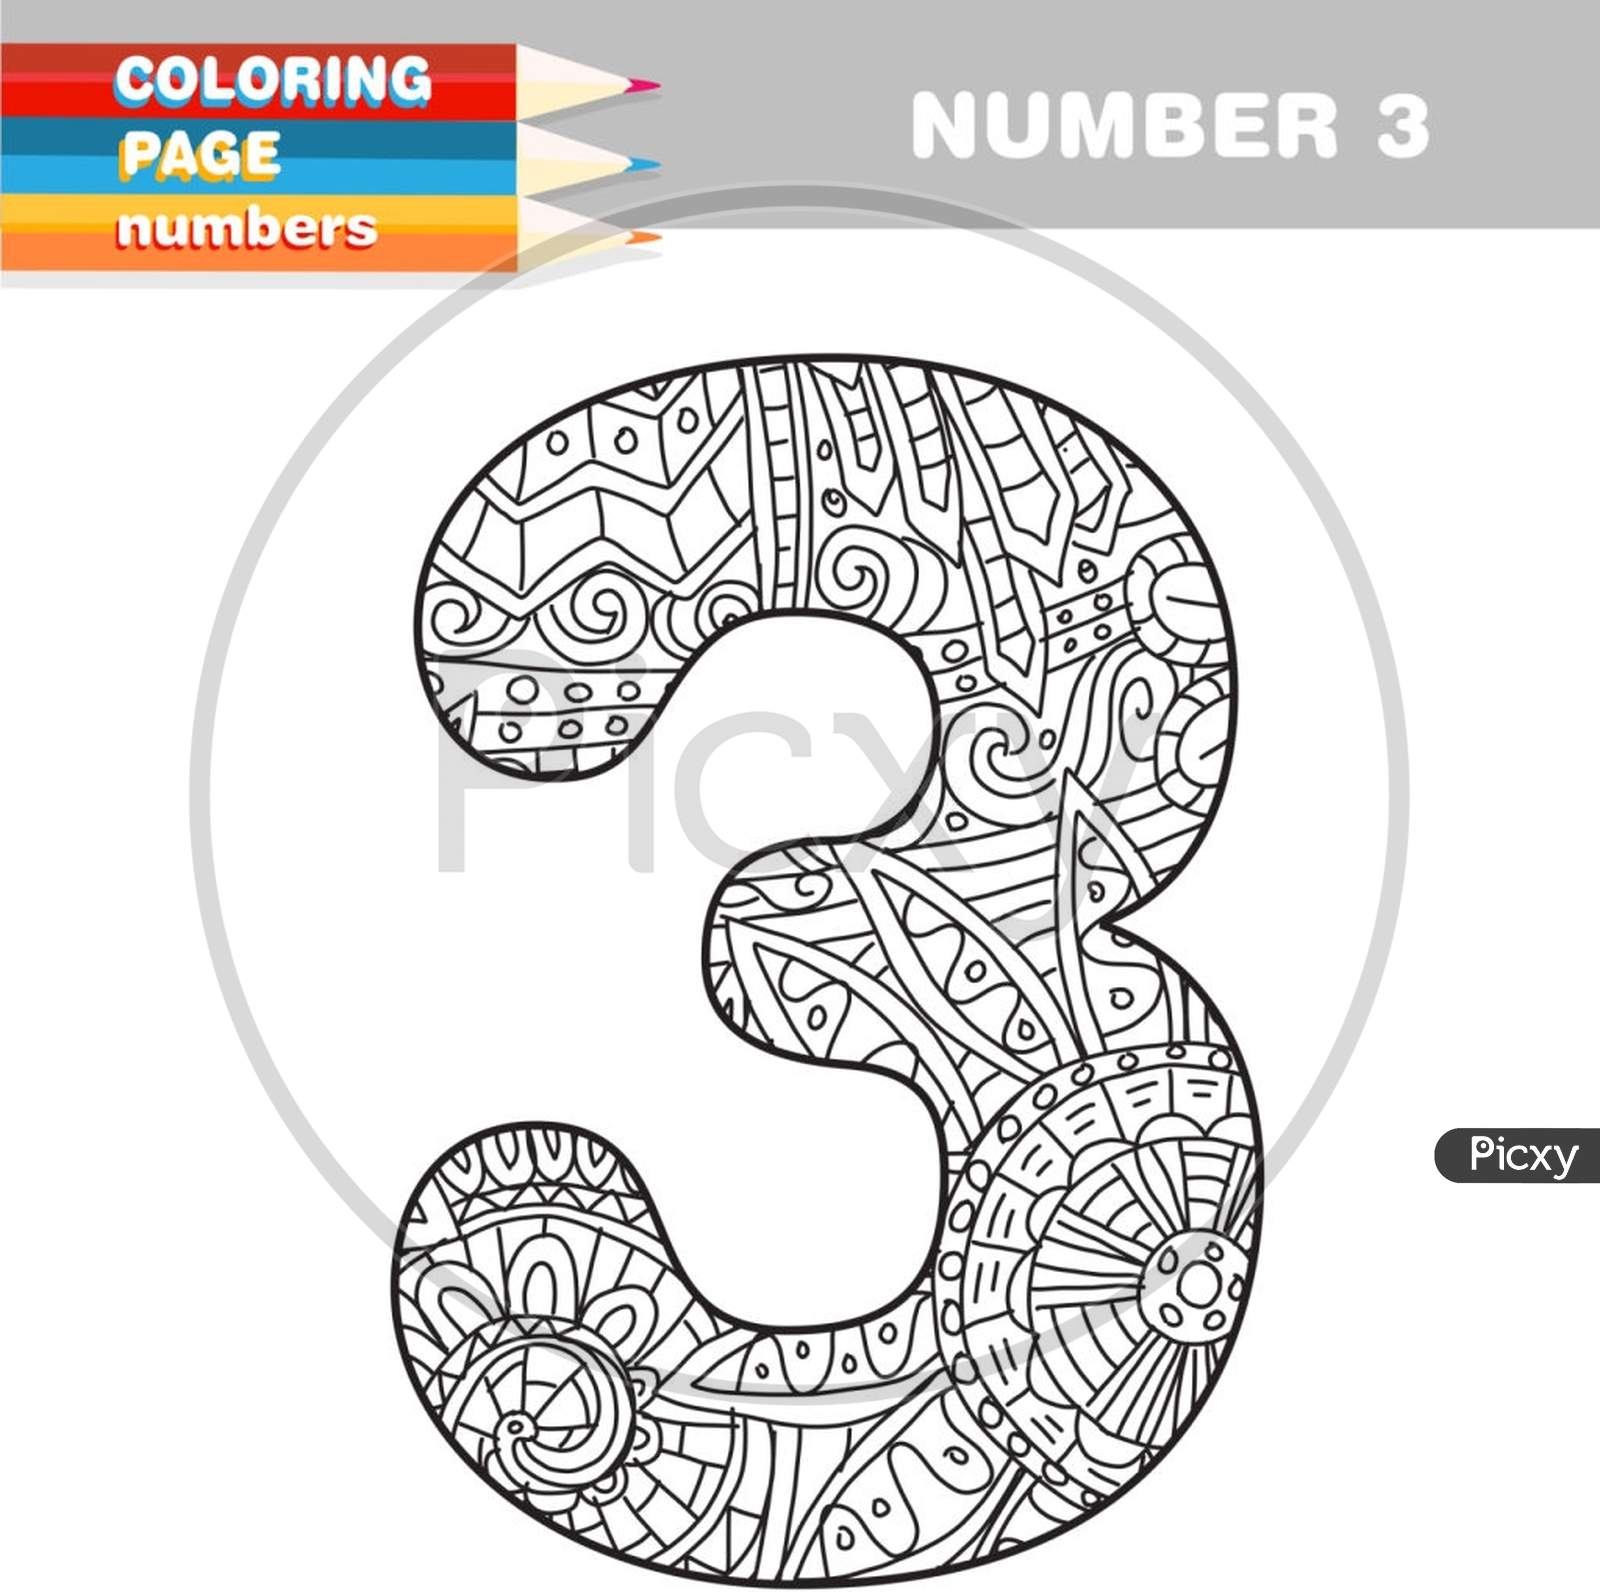 Download Image Of Coloring Book Numbers Hand Drawn Template For Kids Ou485497 Picxy